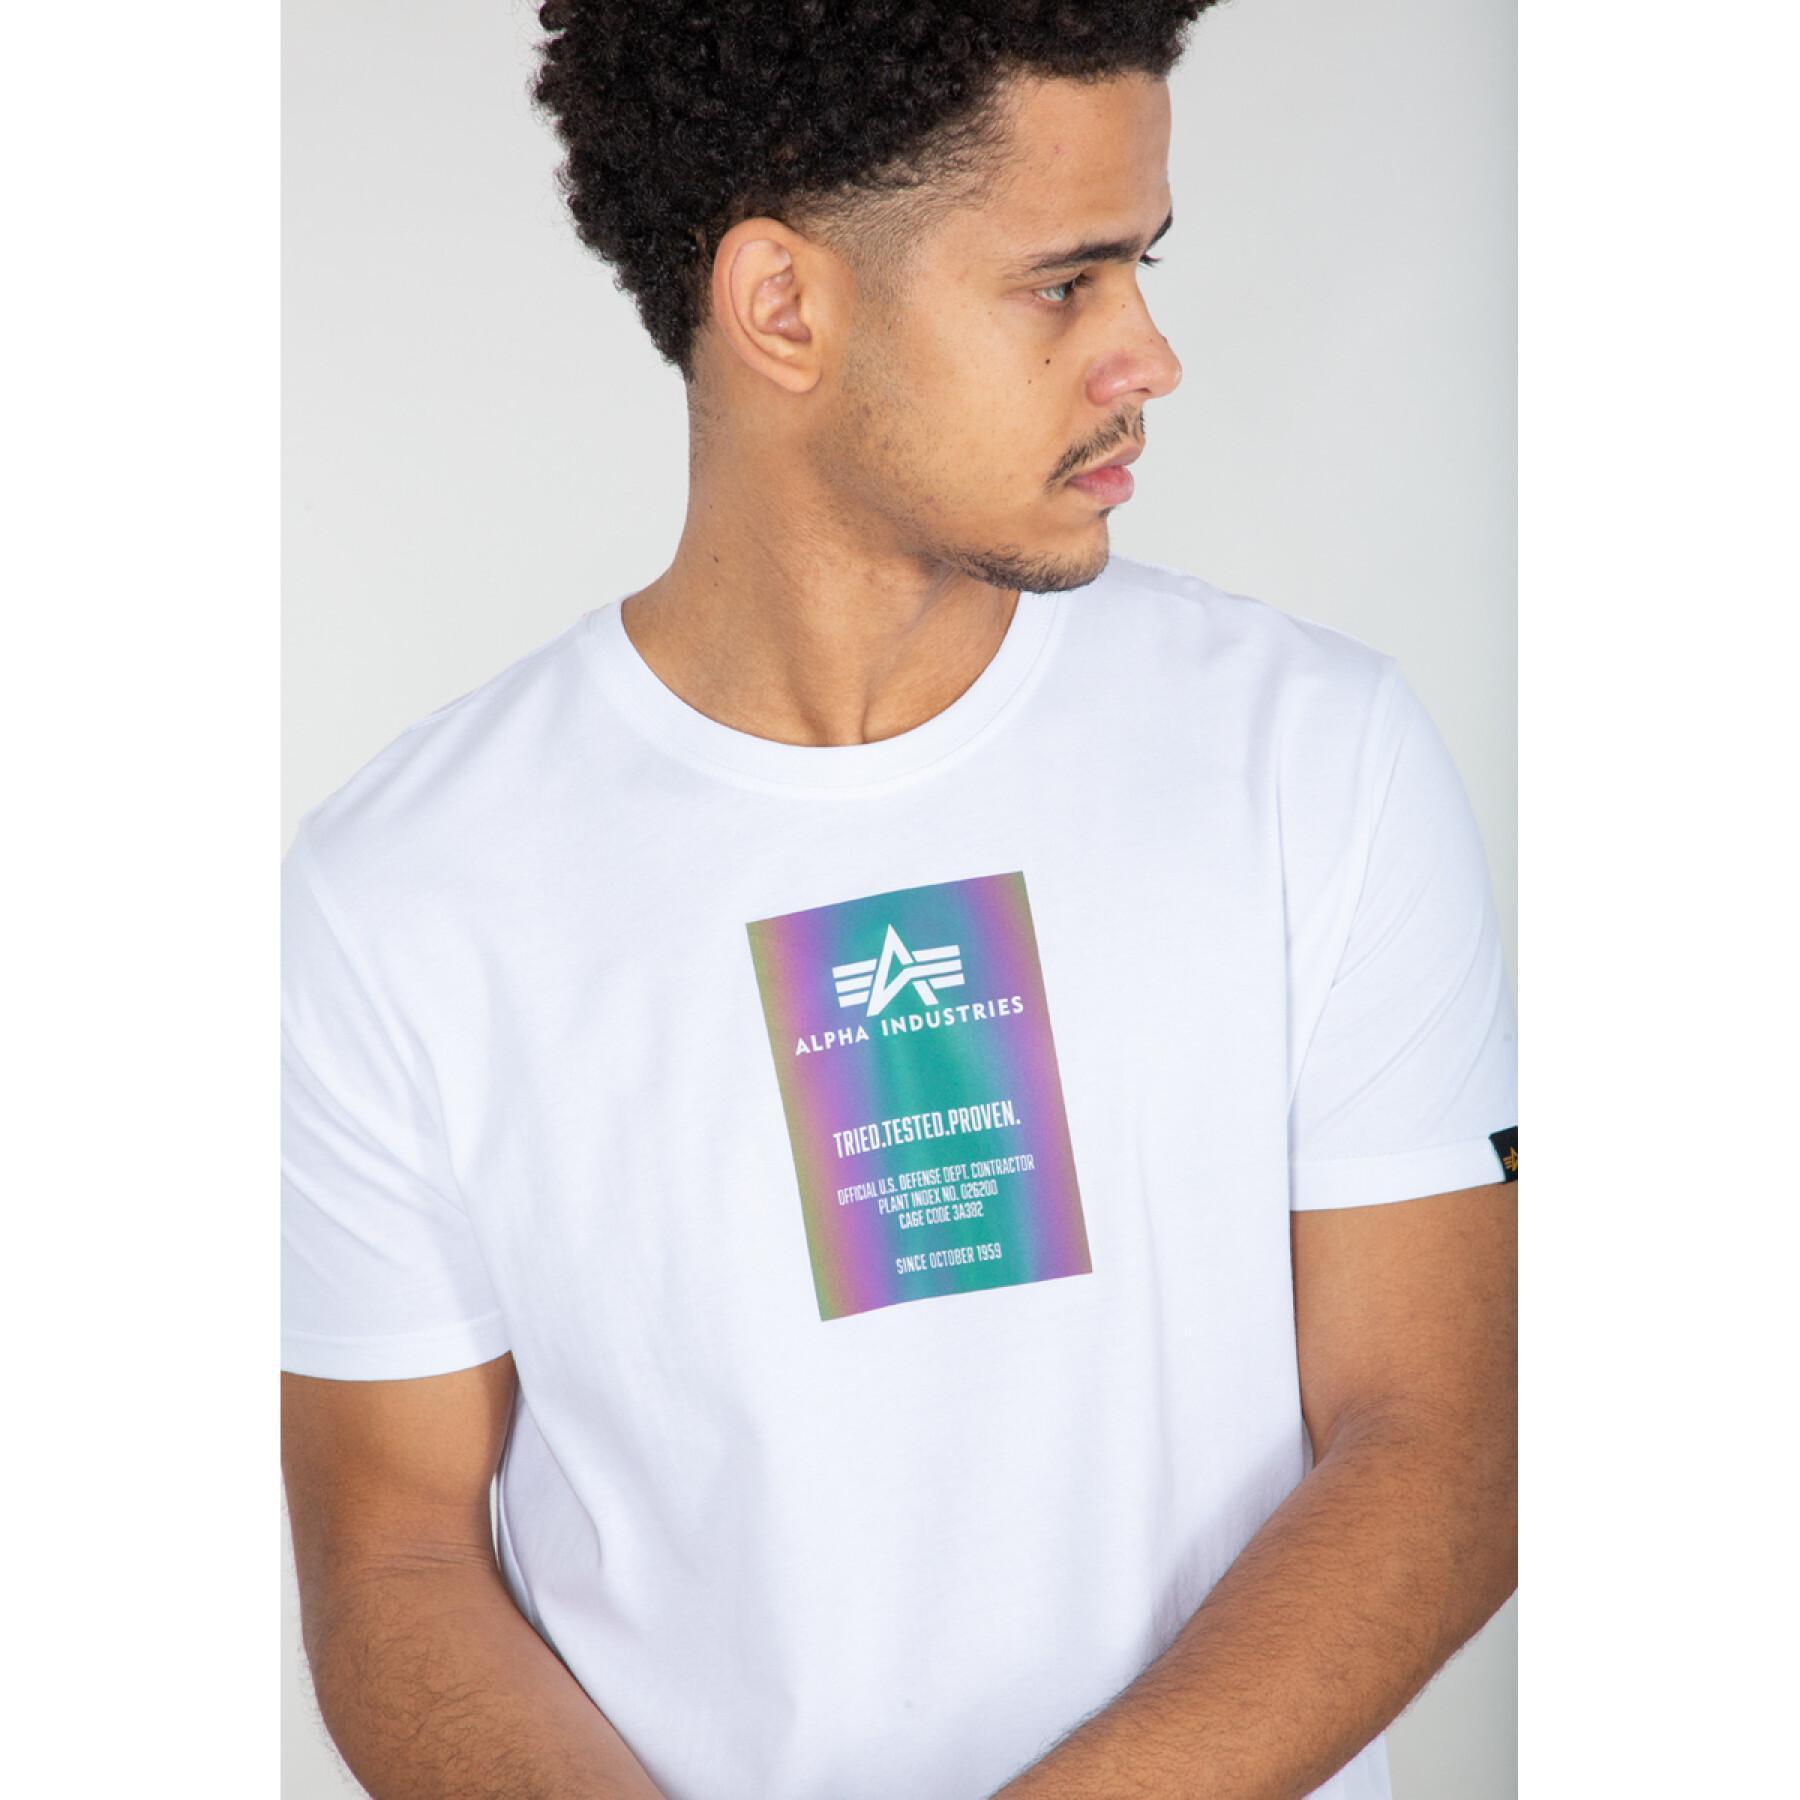 T-shirt Alpha - Label Industries and Rainbow Polo shirts Lifestyle Man Reflective - T-shirts 